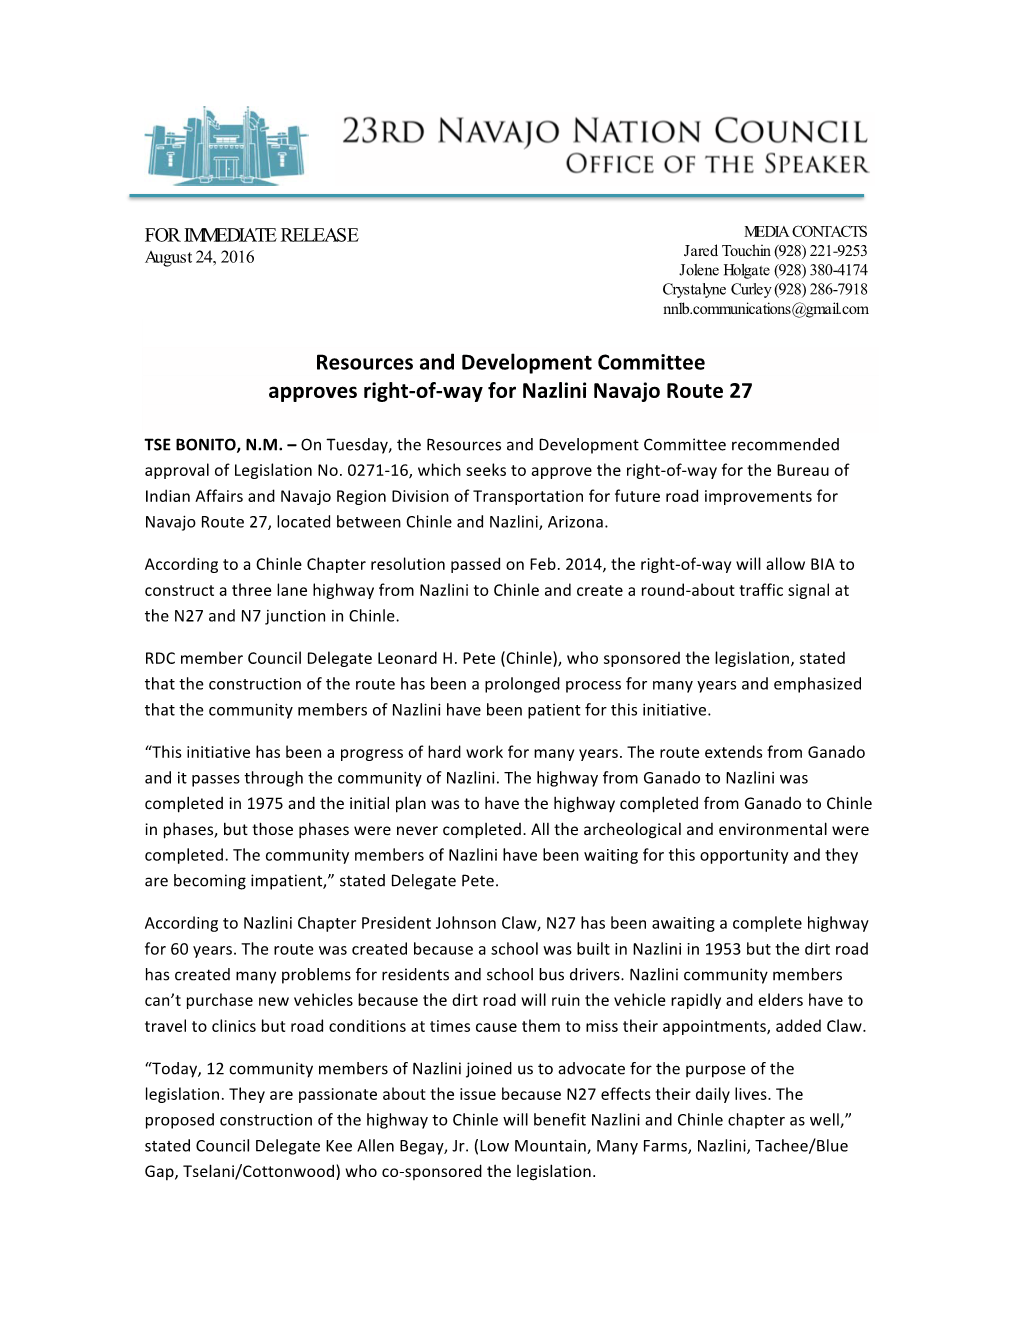 Resources and Development Committee Approves Right-‐Of-‐Way for Nazlini Navajo